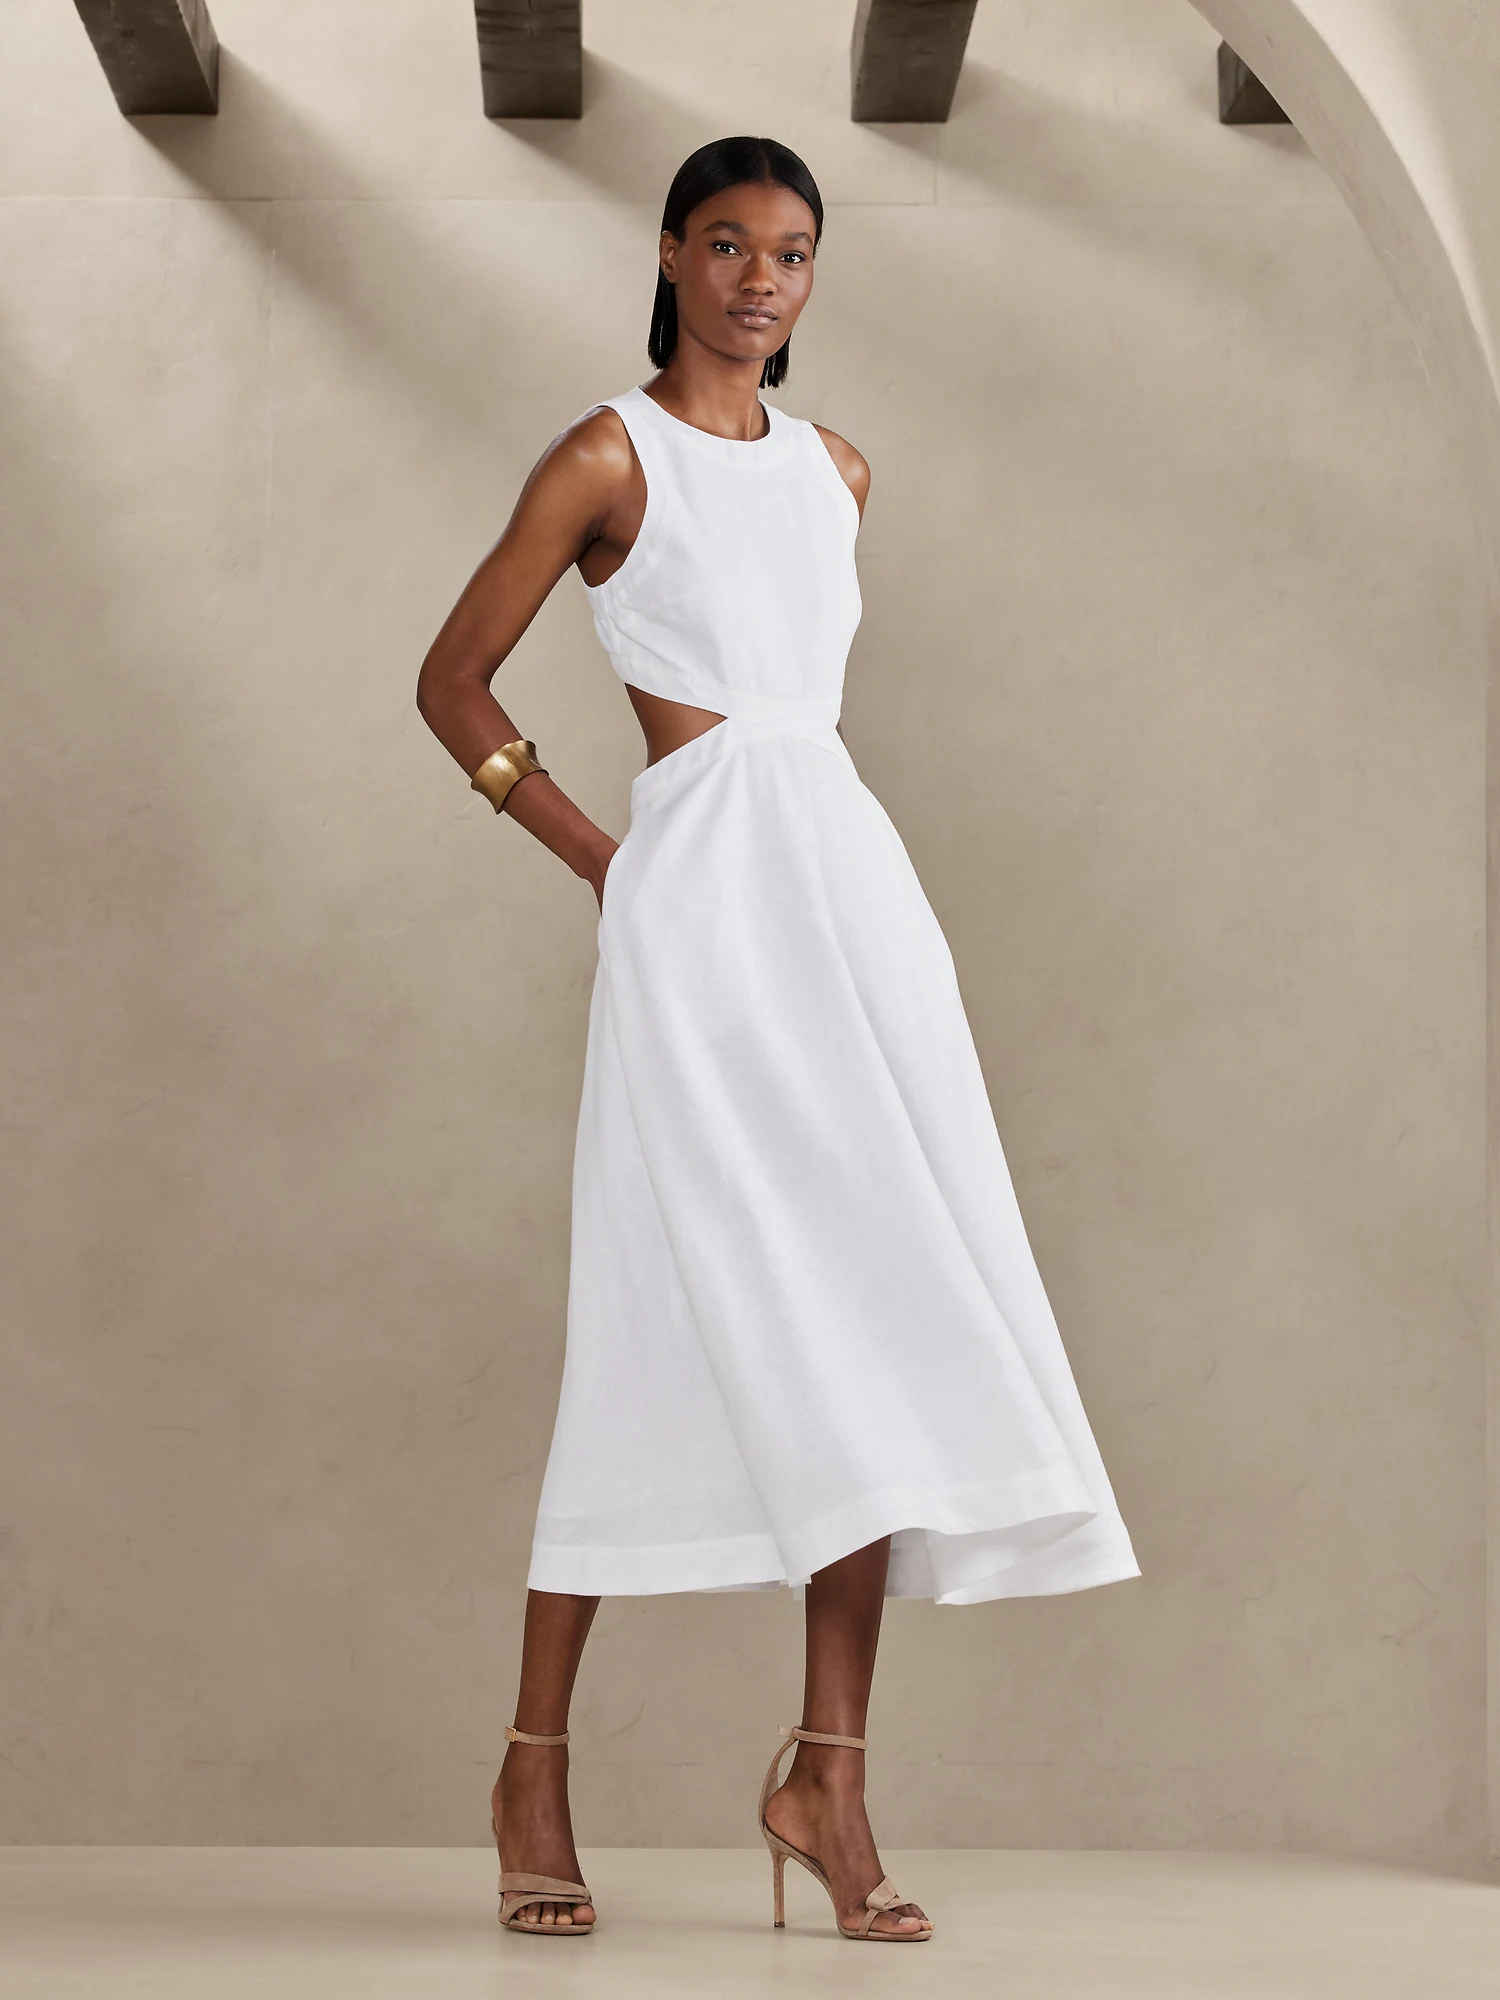 Easy Breezy Summer Dresses for all Occasions 